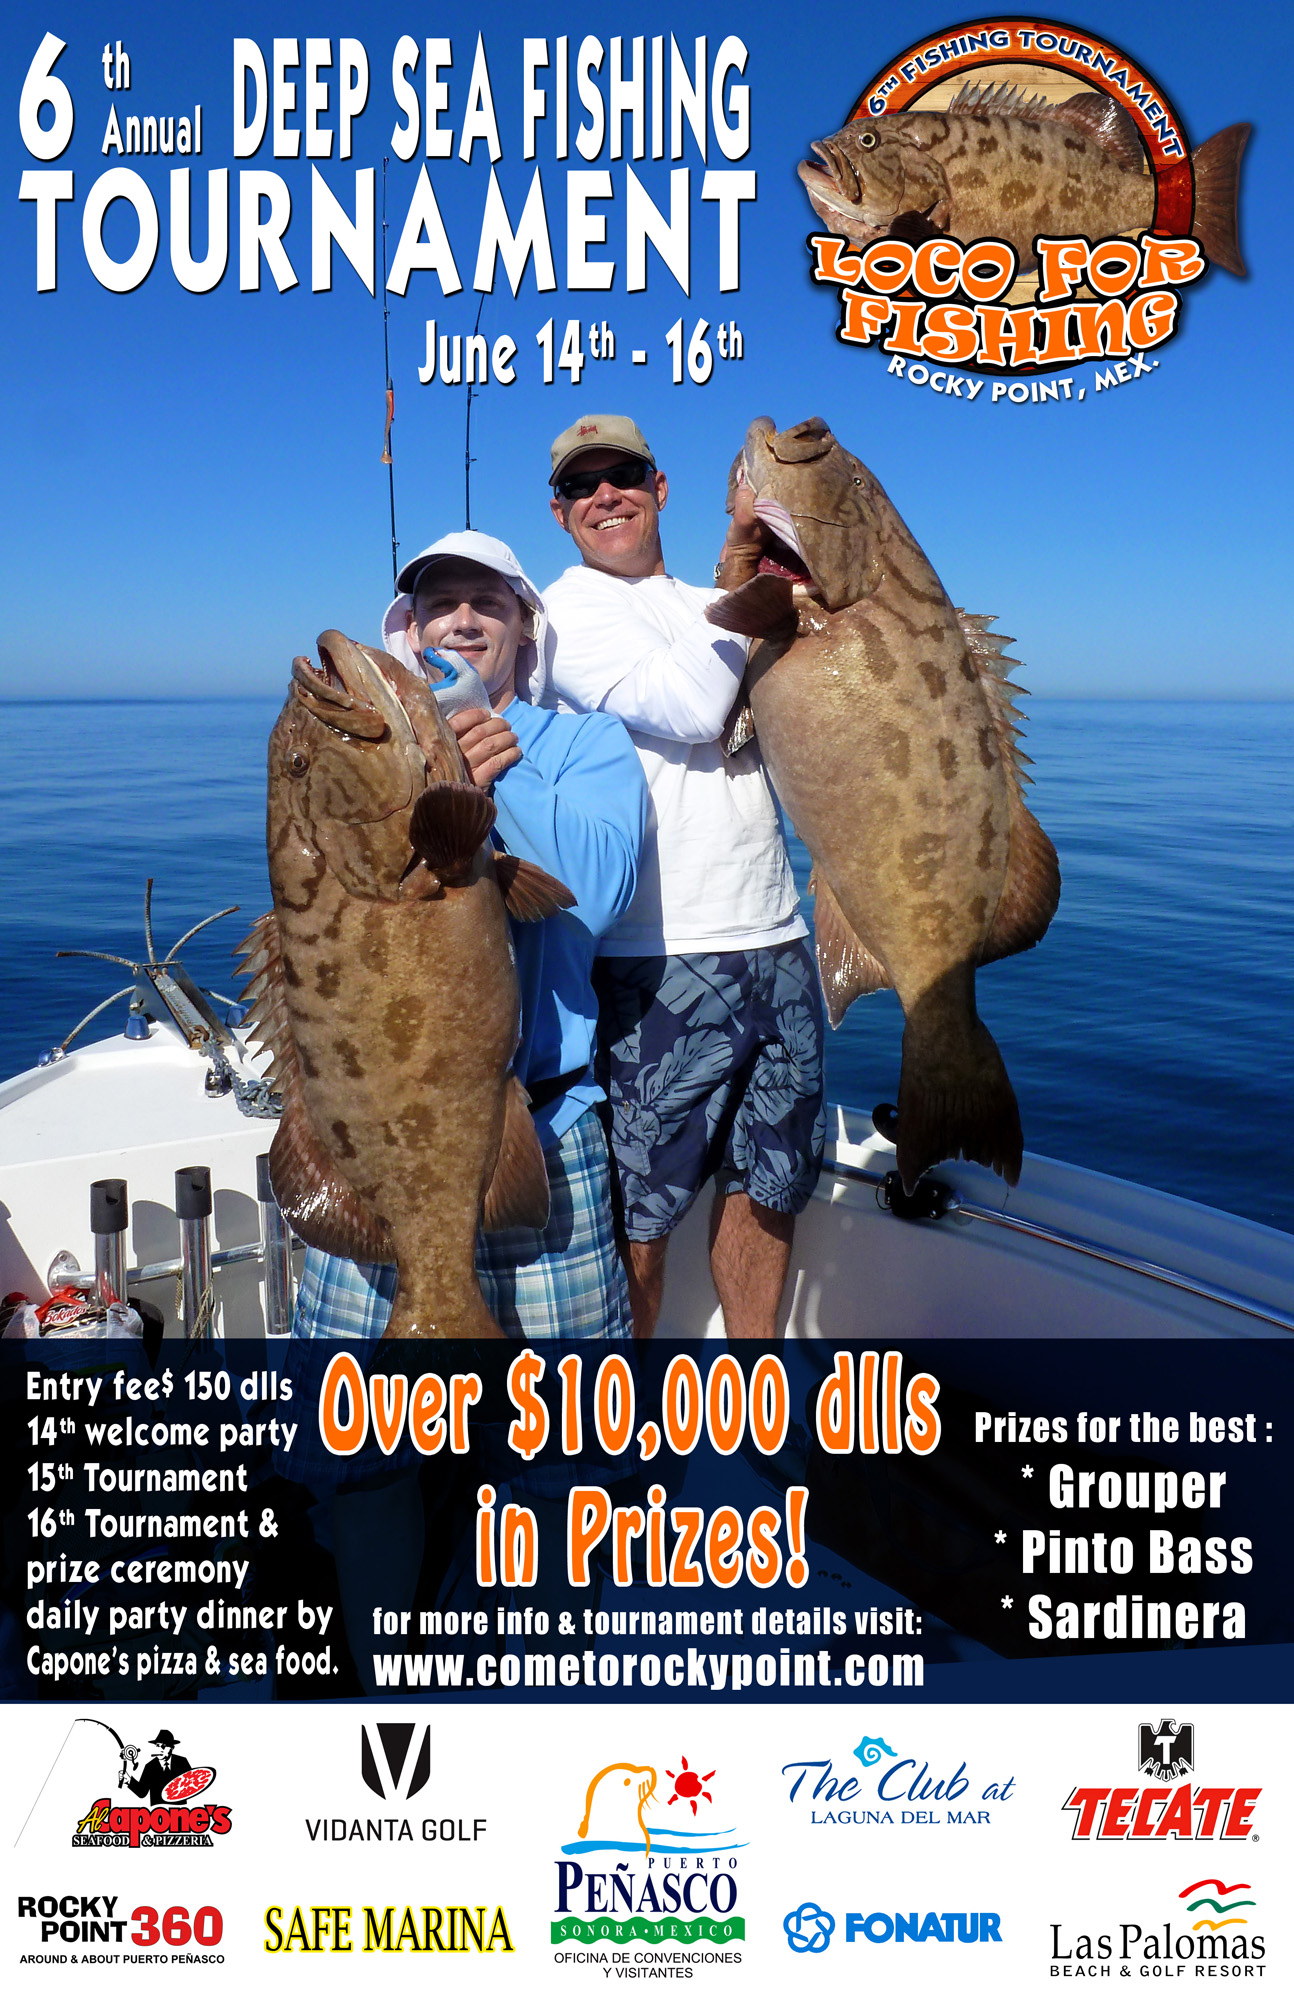 loco-for-fishing-poster Rocky Point 360s's All Star Weekend Rundown 5/31 - 6/2